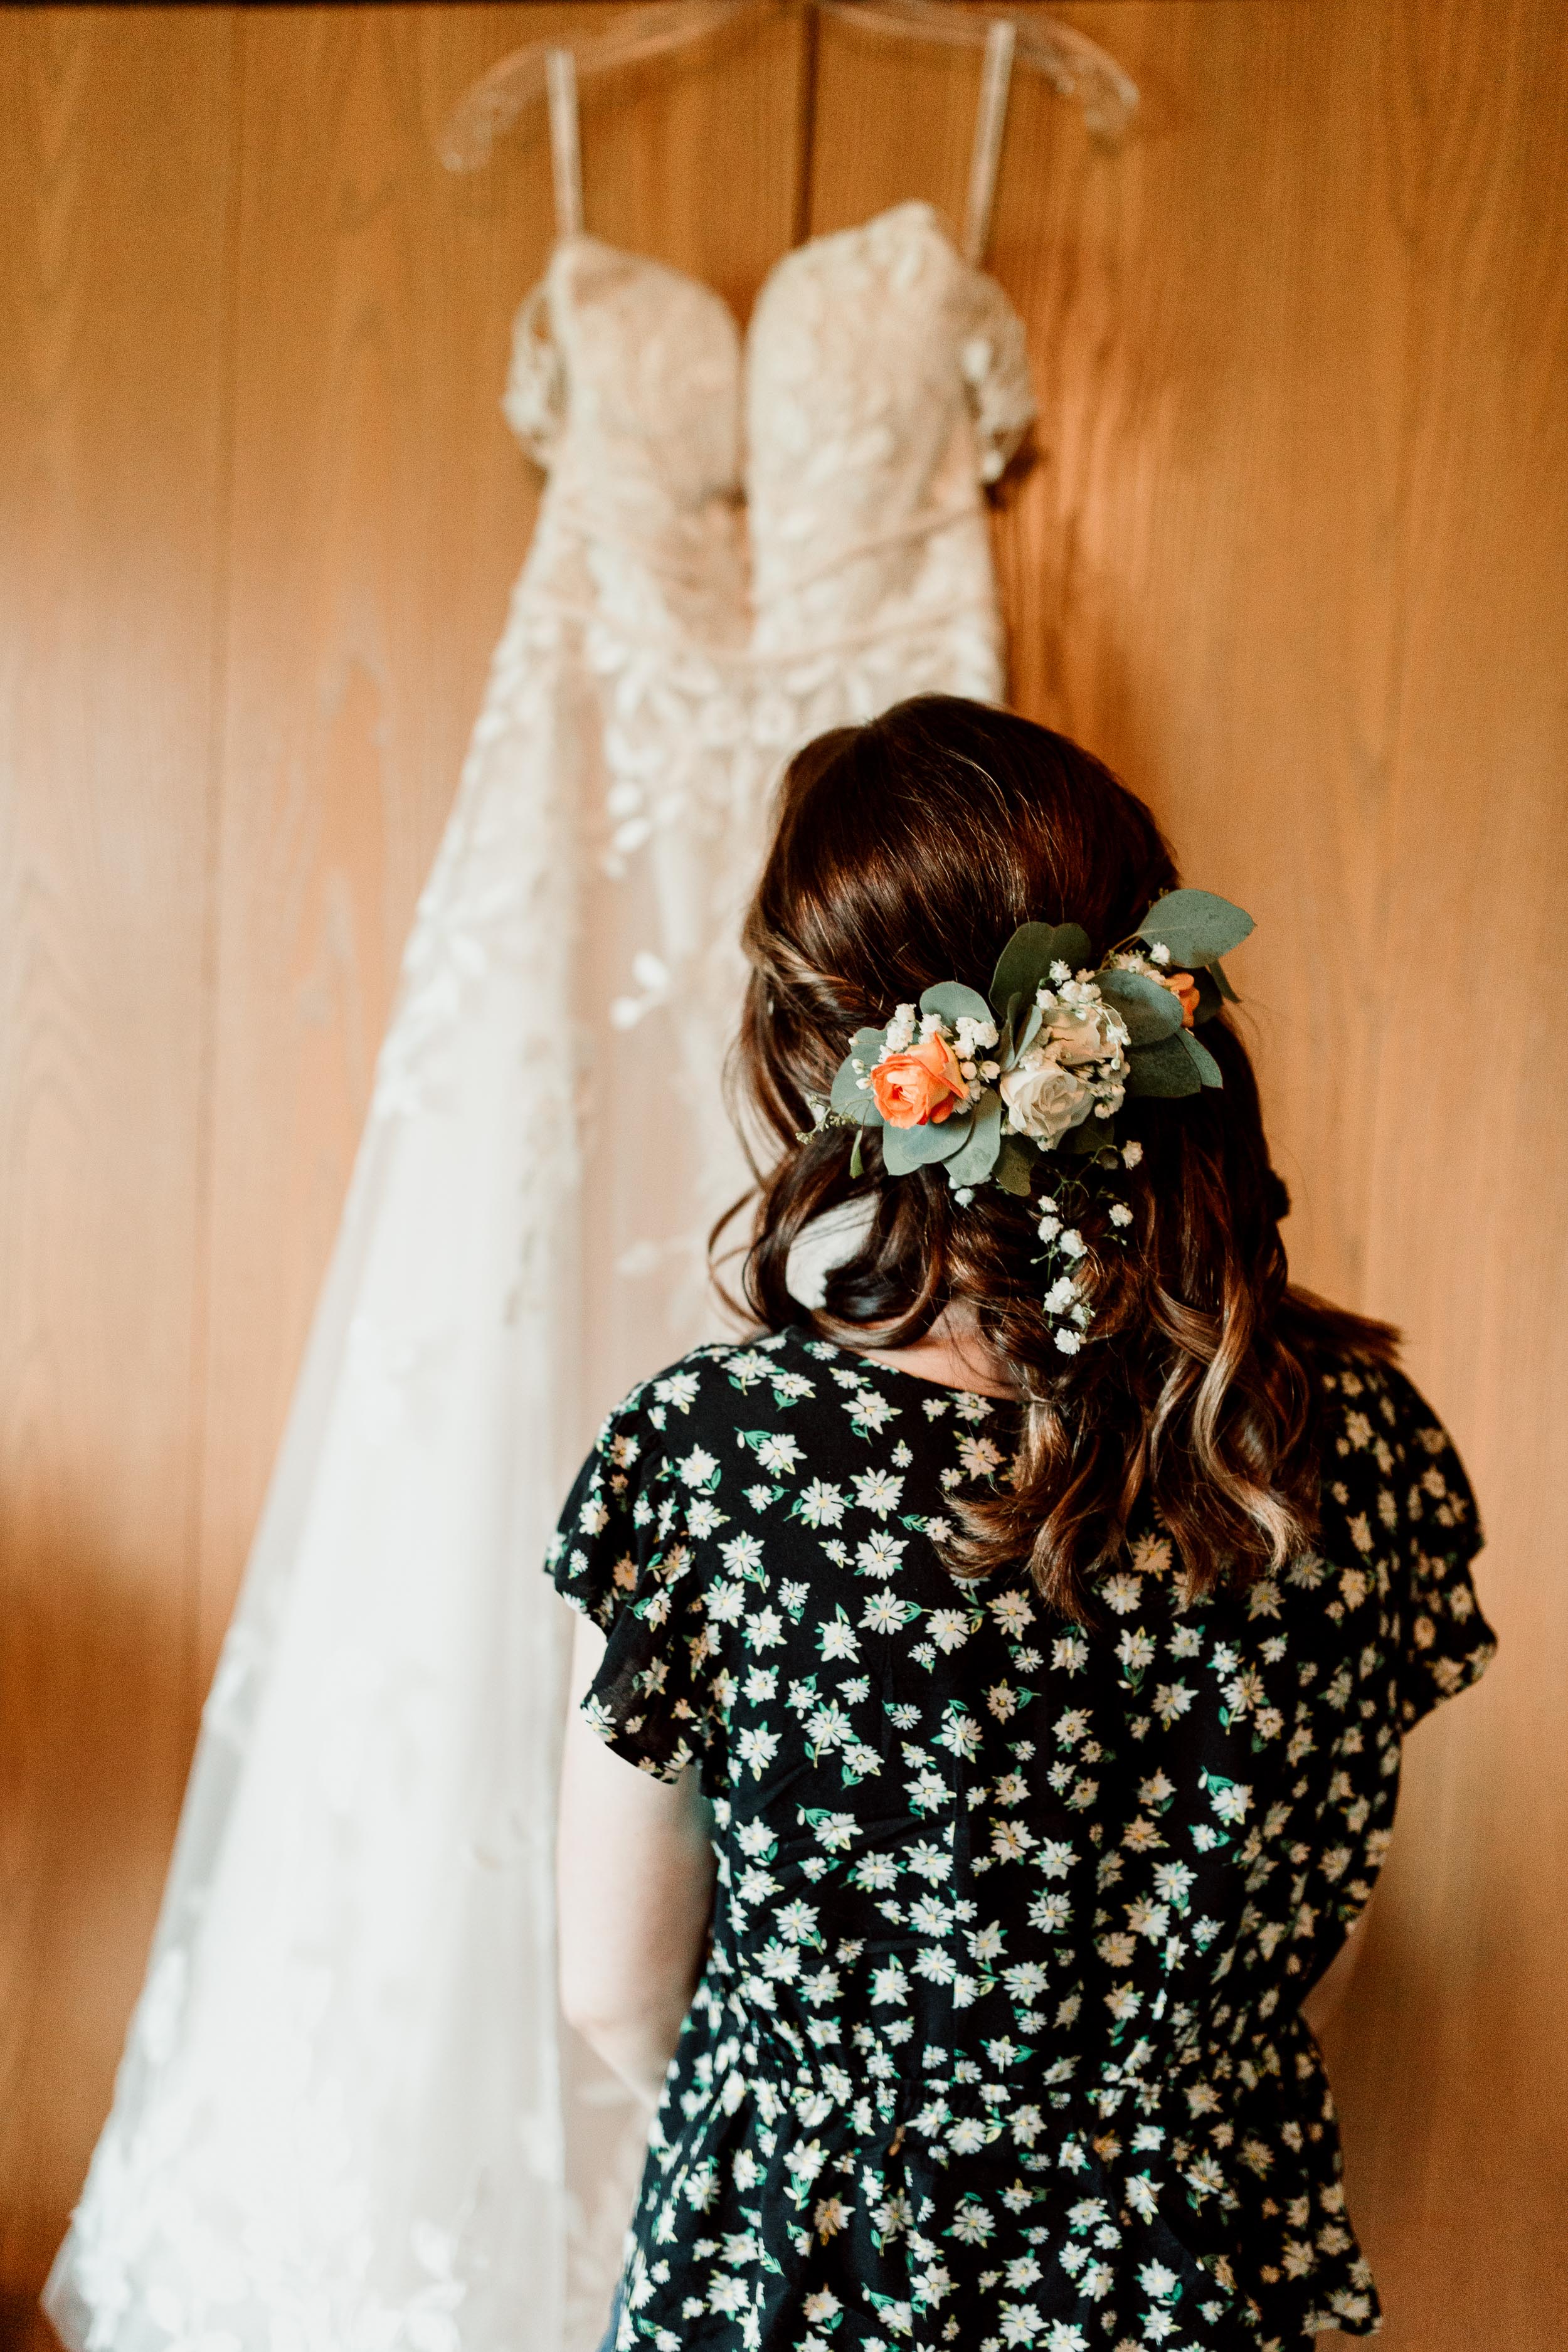 floral hair piece for wedding day | lace wedding dress | Illinois Wedding Photographer | Chicago Illinois Wedding Photographers
